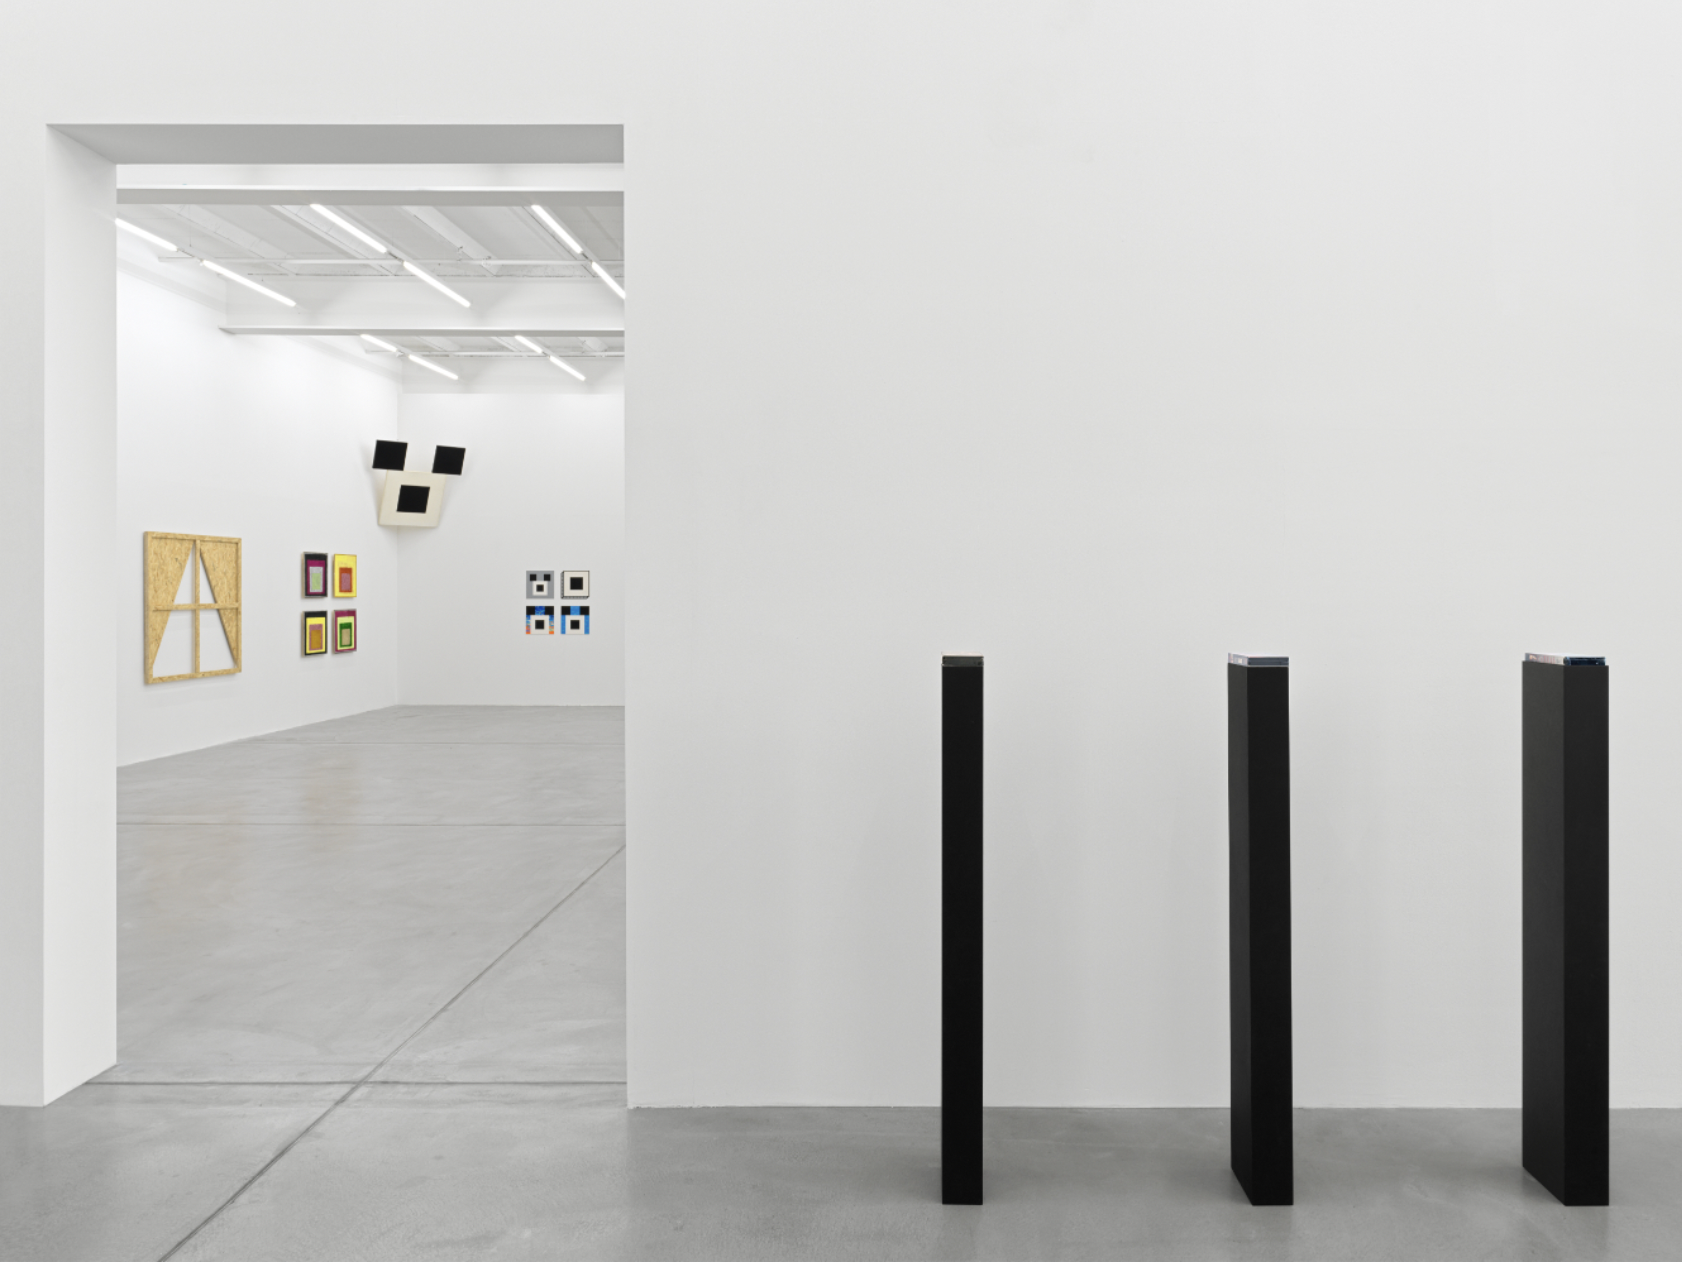 Installation view with works by Gina Fischli, Anton Bruhin, and Mitchell Anderson